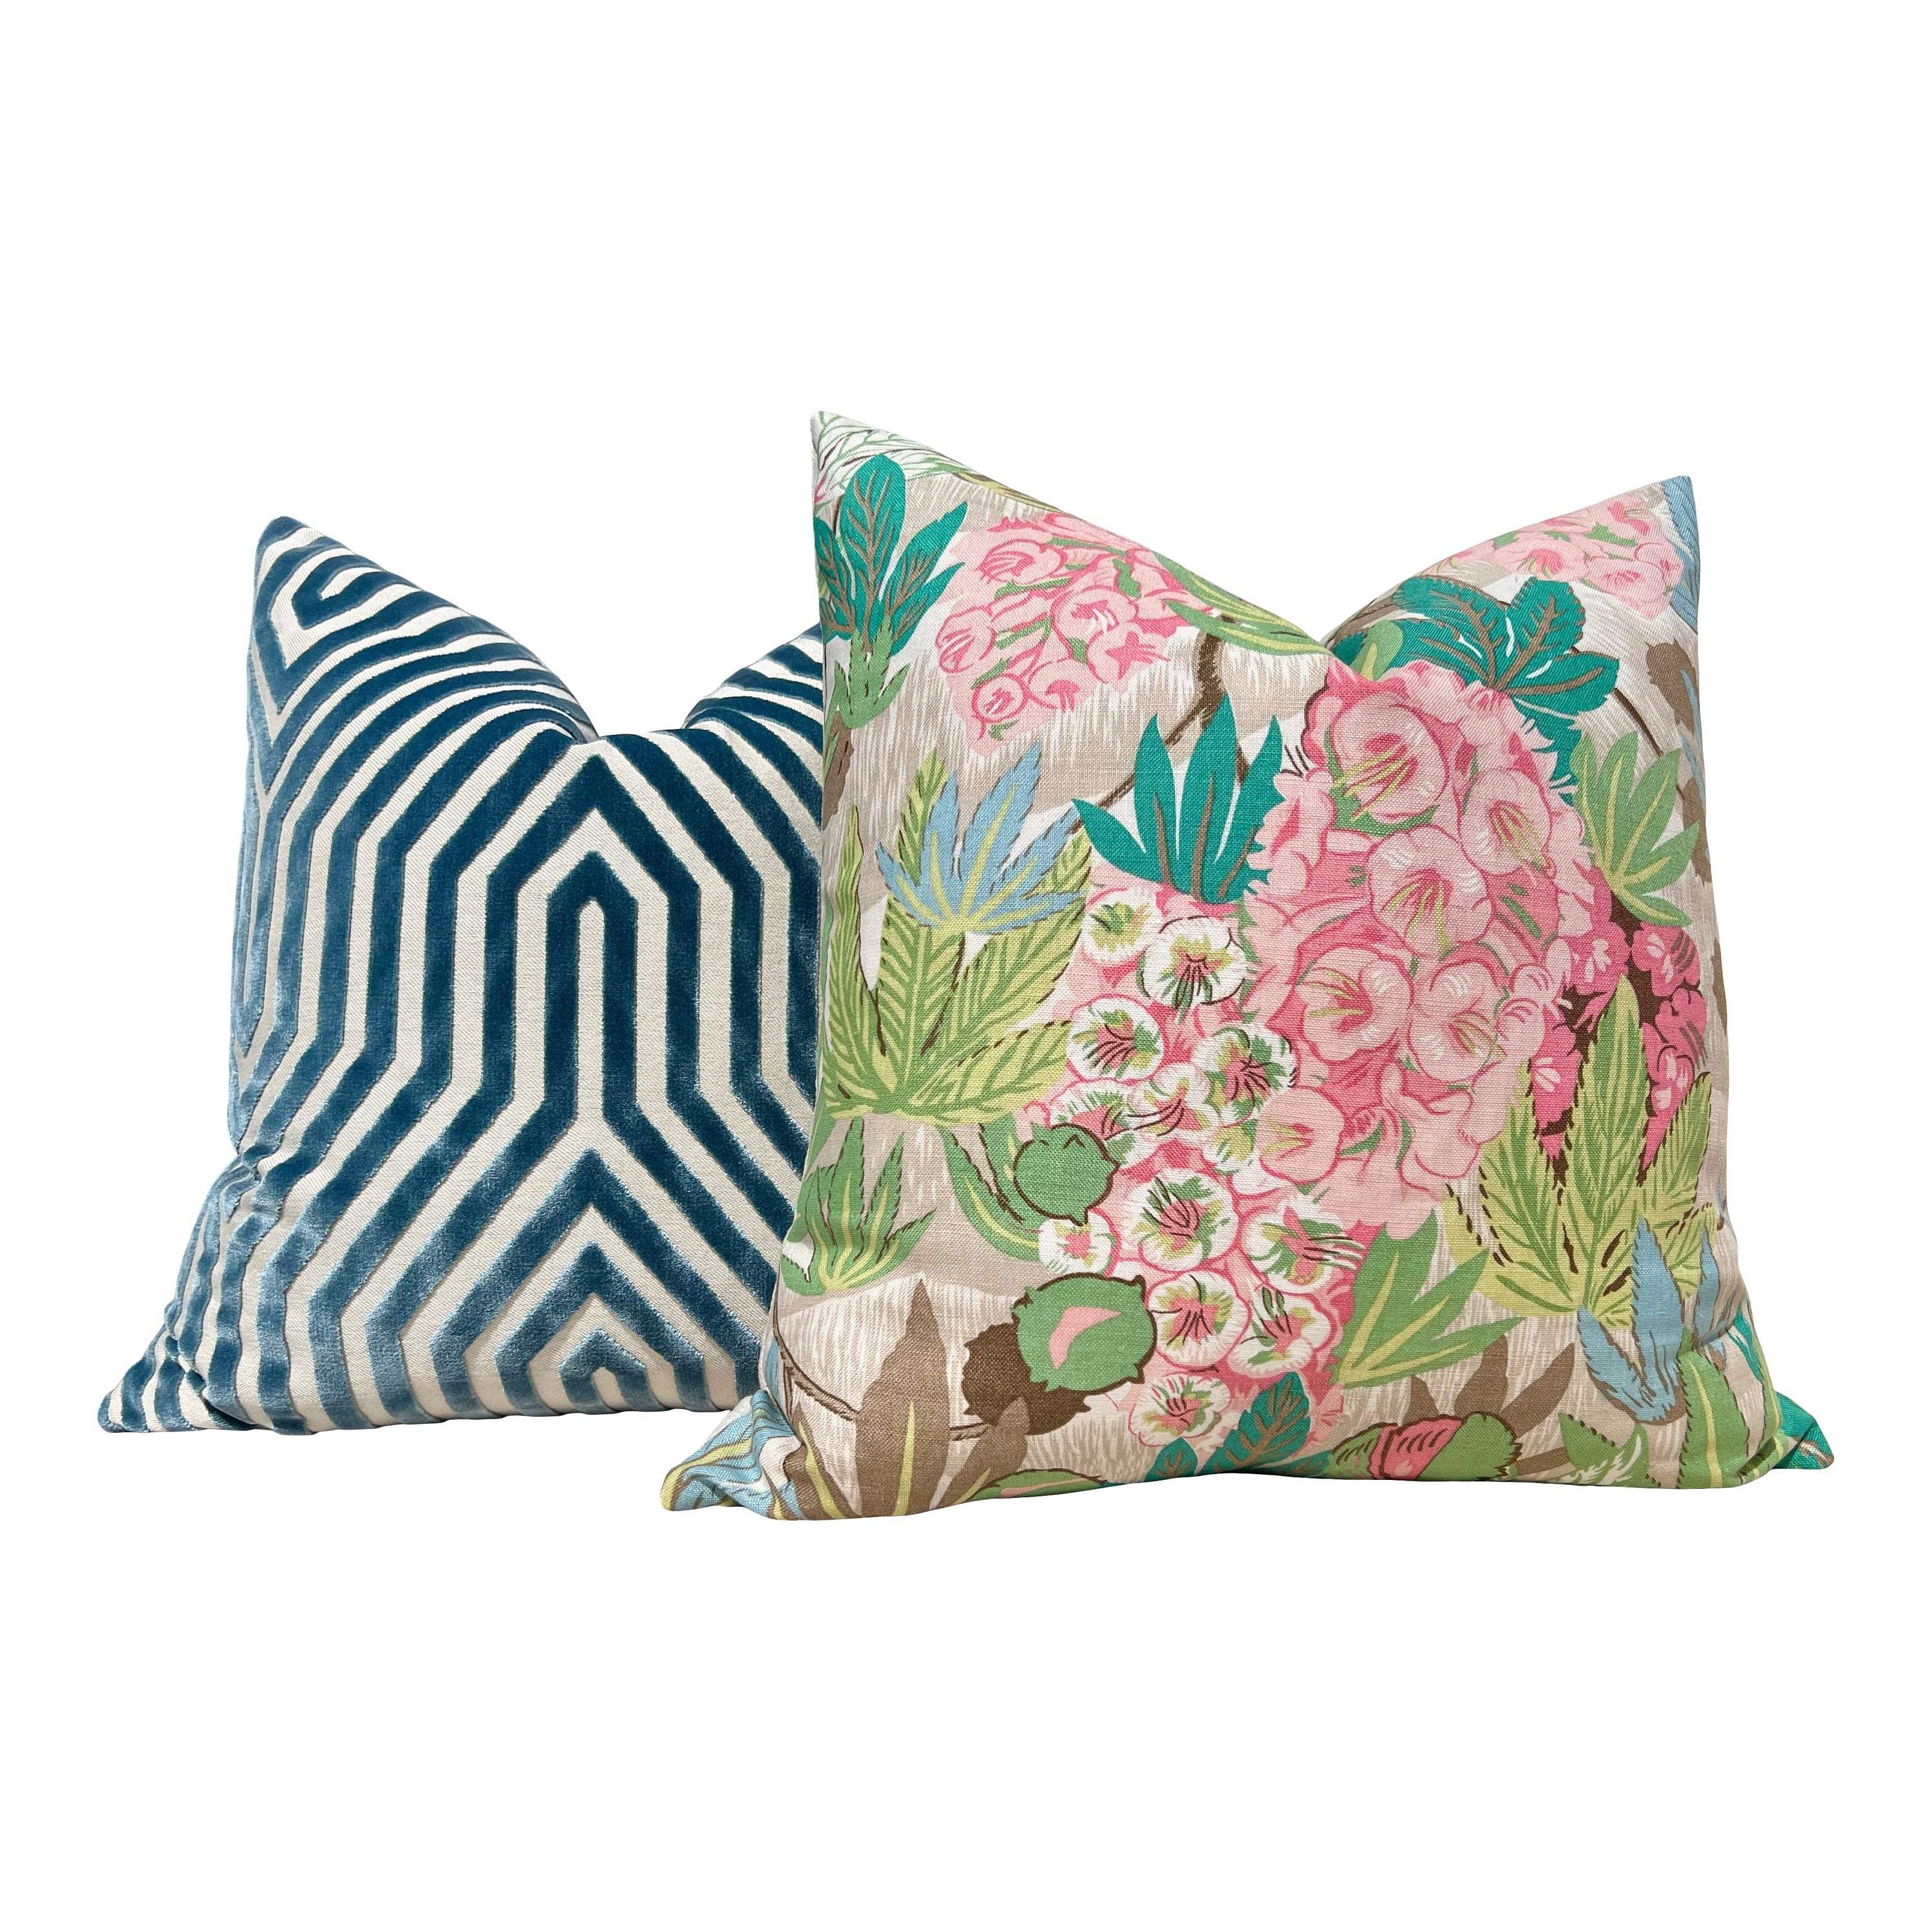 Del Lungo Exotic Floral Pillow Pink Teal Green. Tropical Blush Pillow Case, Designer Cushion Cover, Euro Sham Slipcover, Lumbar Pillow